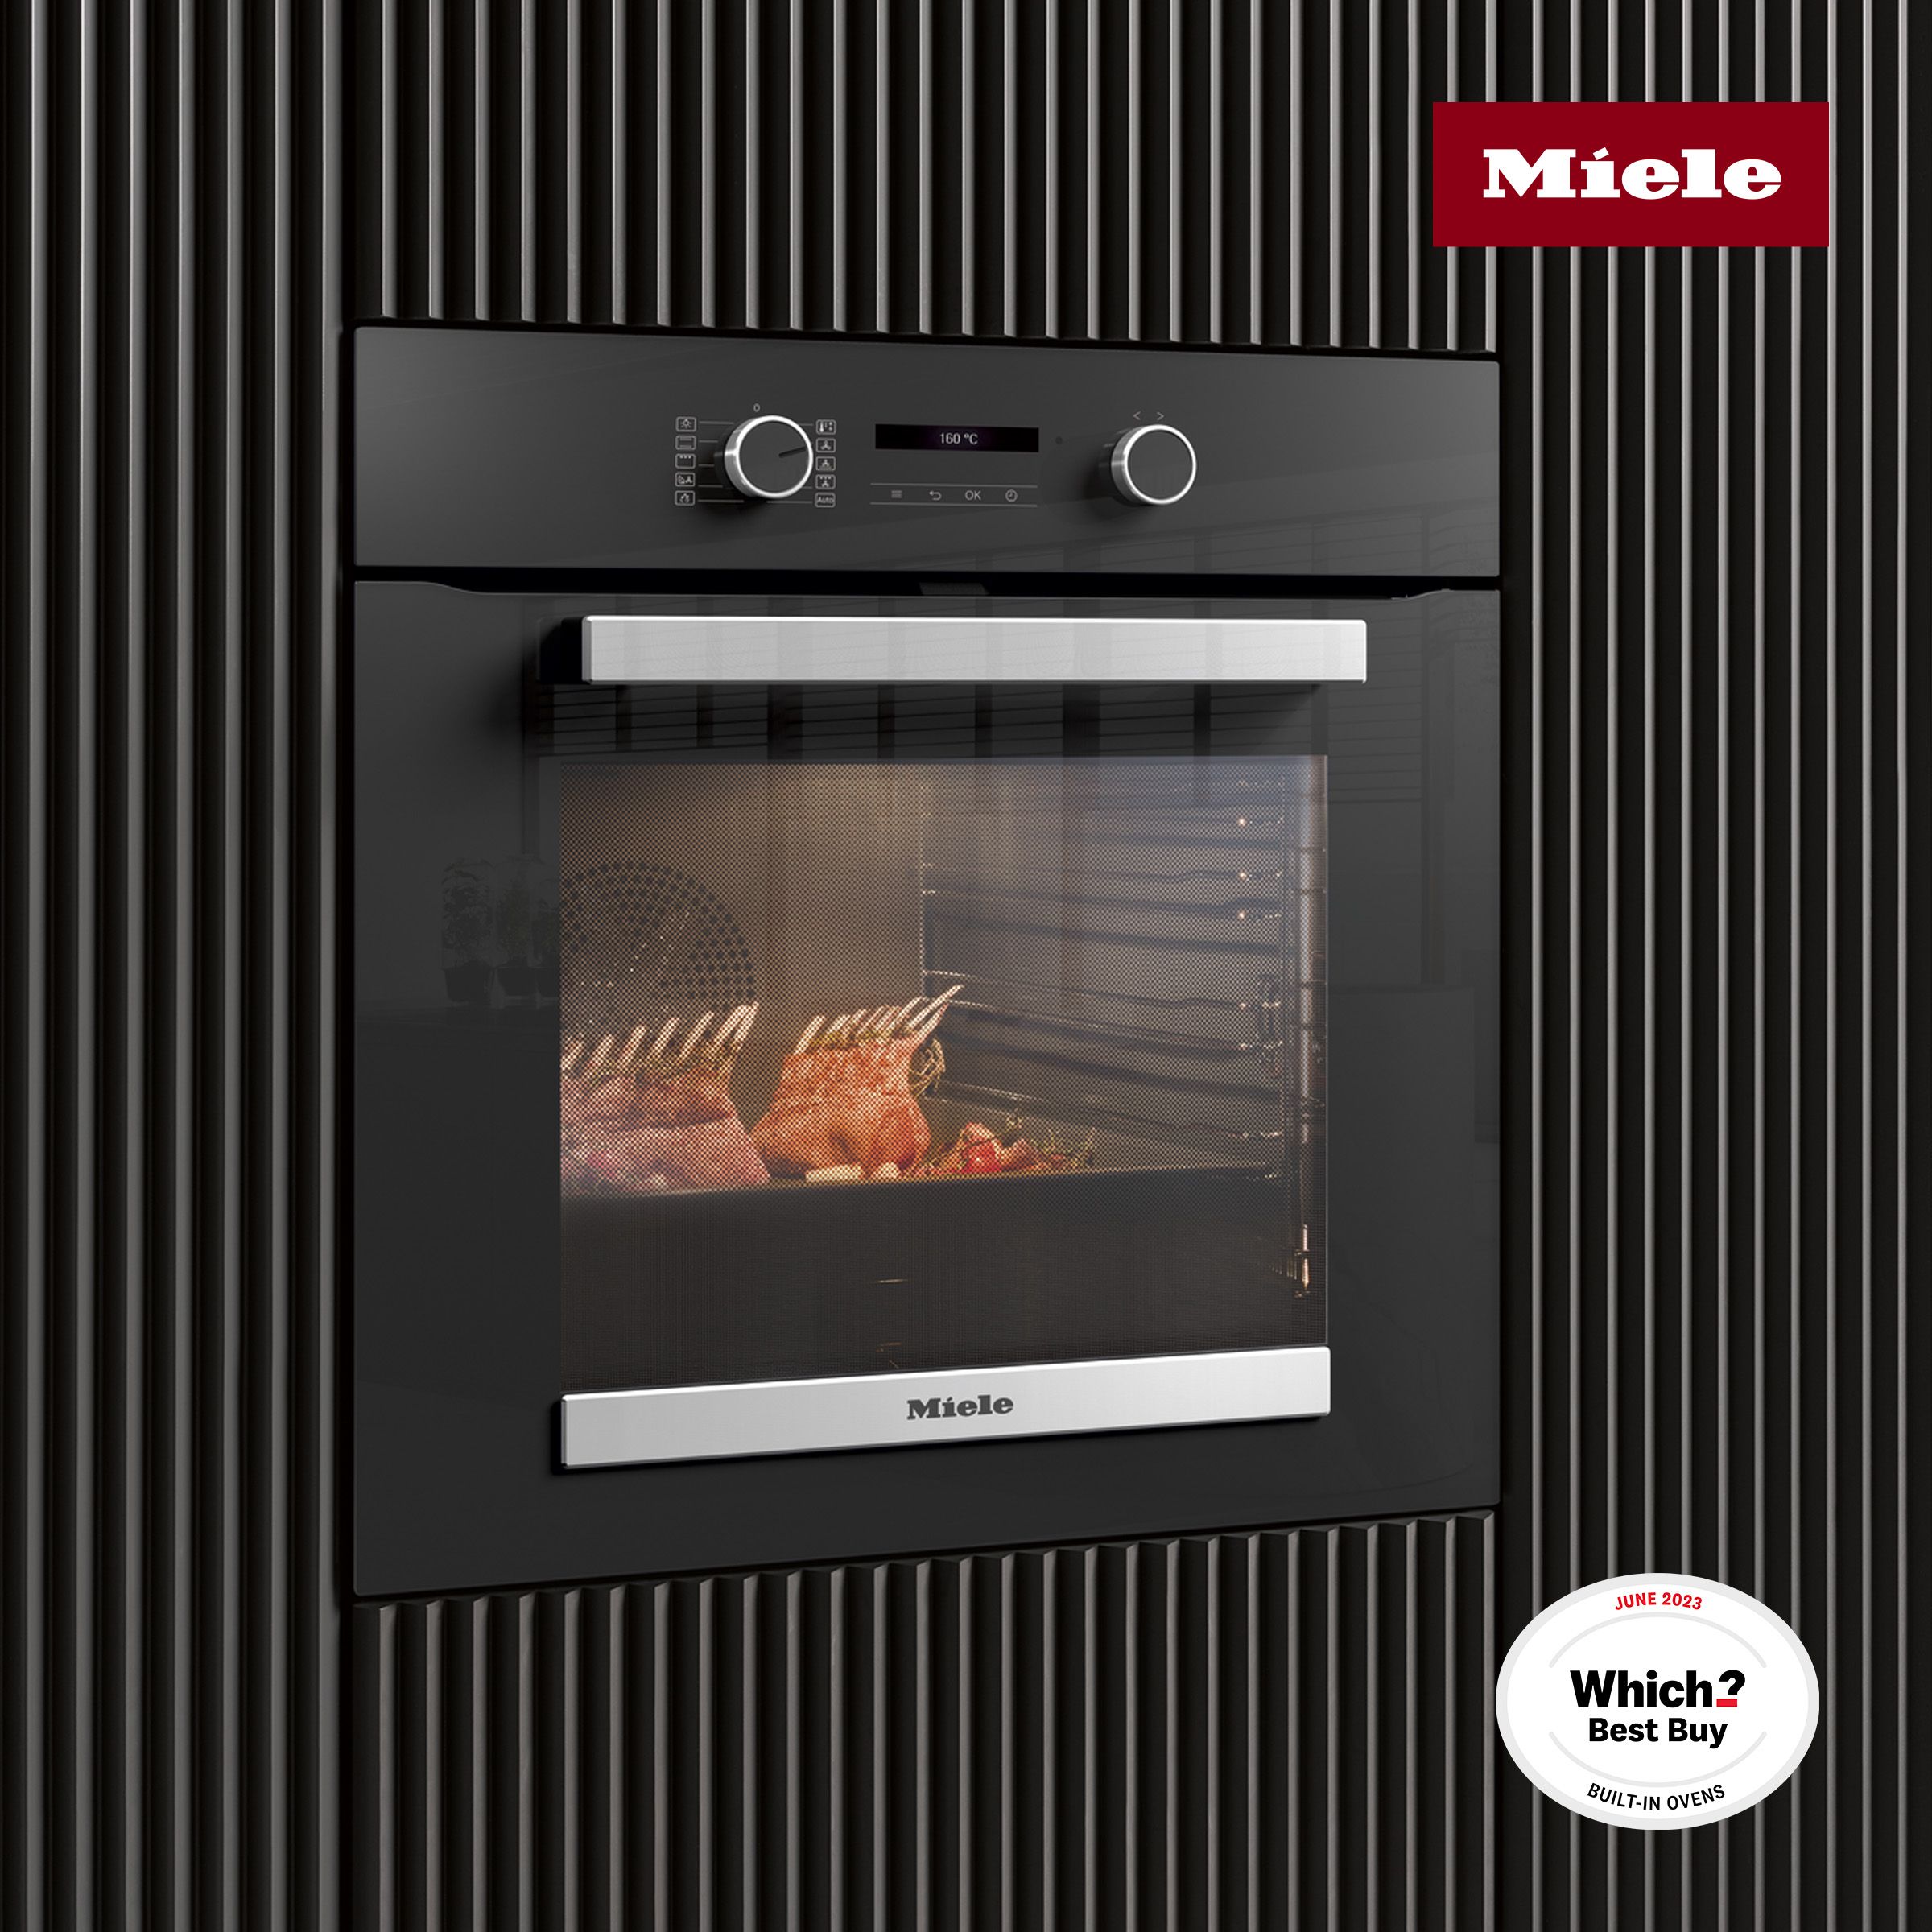 miele - Awarded Which? Best Buy, take your cooking to the next level with Miele’s Discovery Oven.